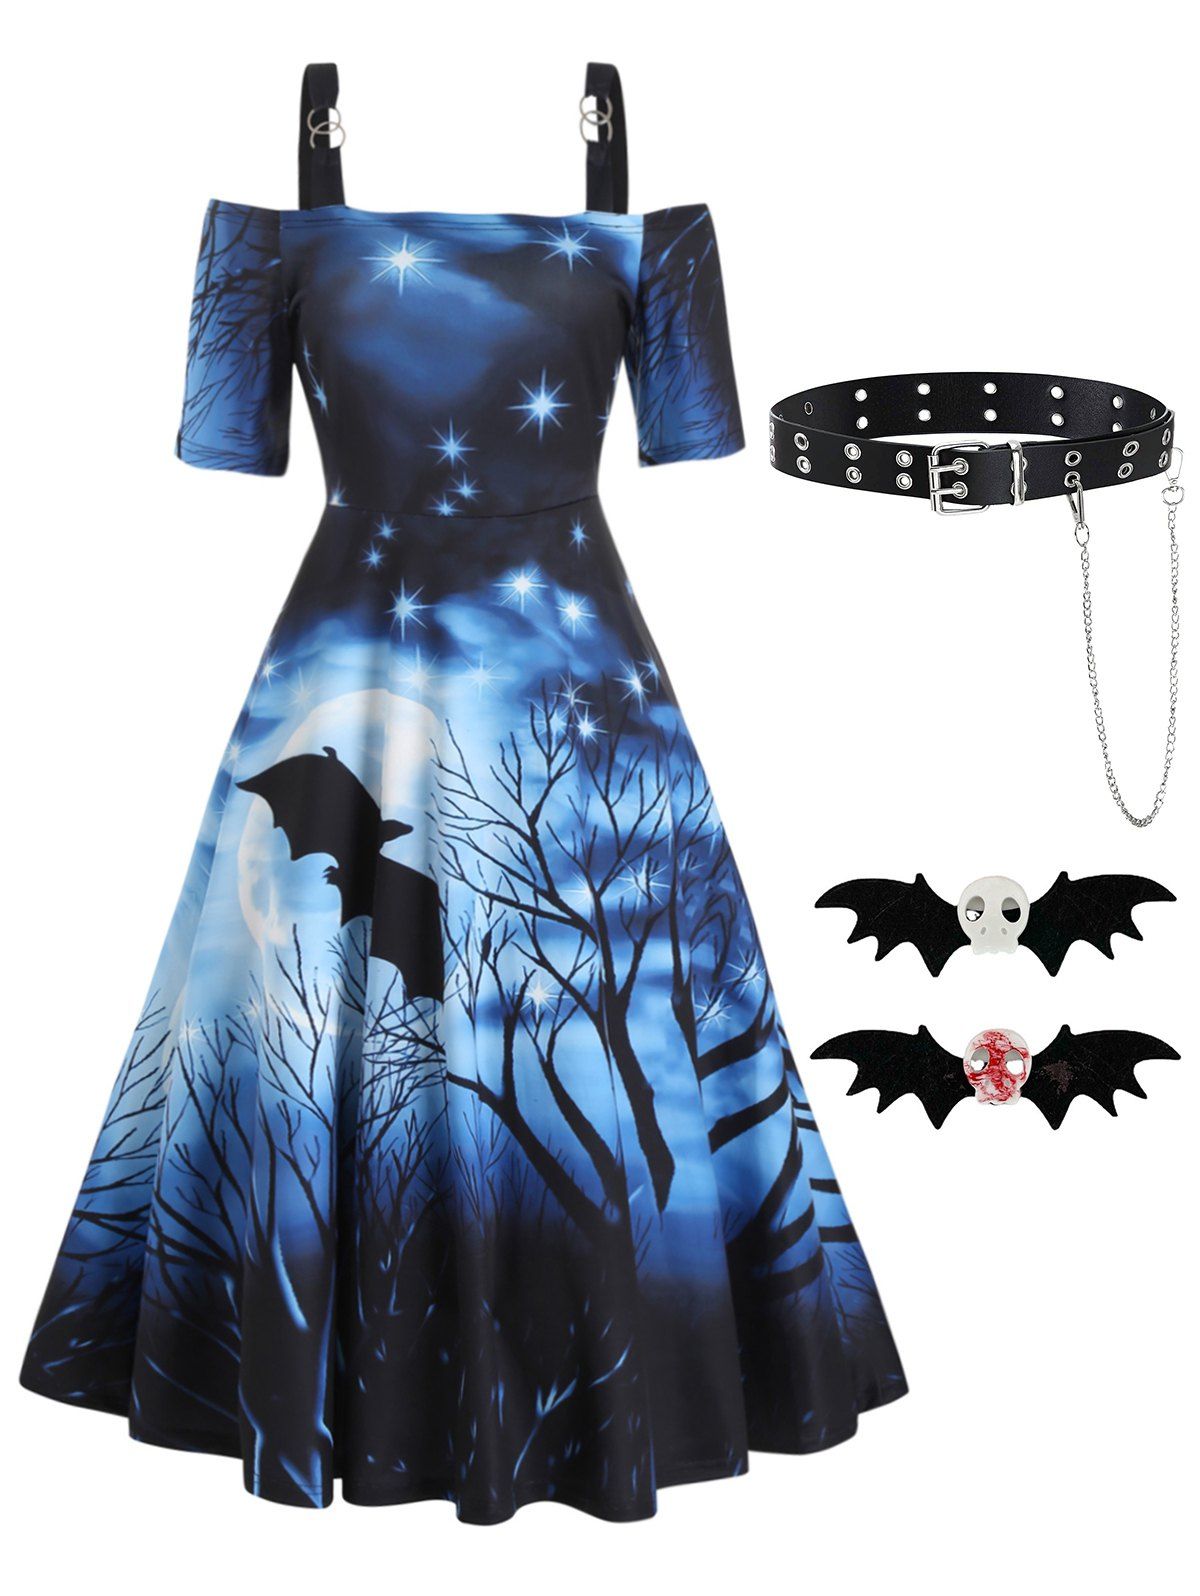 Bat Moon Night Print Cold Shoulder Midi Dress With Buckle Chain PU Belt And Hair Clips Halloween Outfit - BLUE S